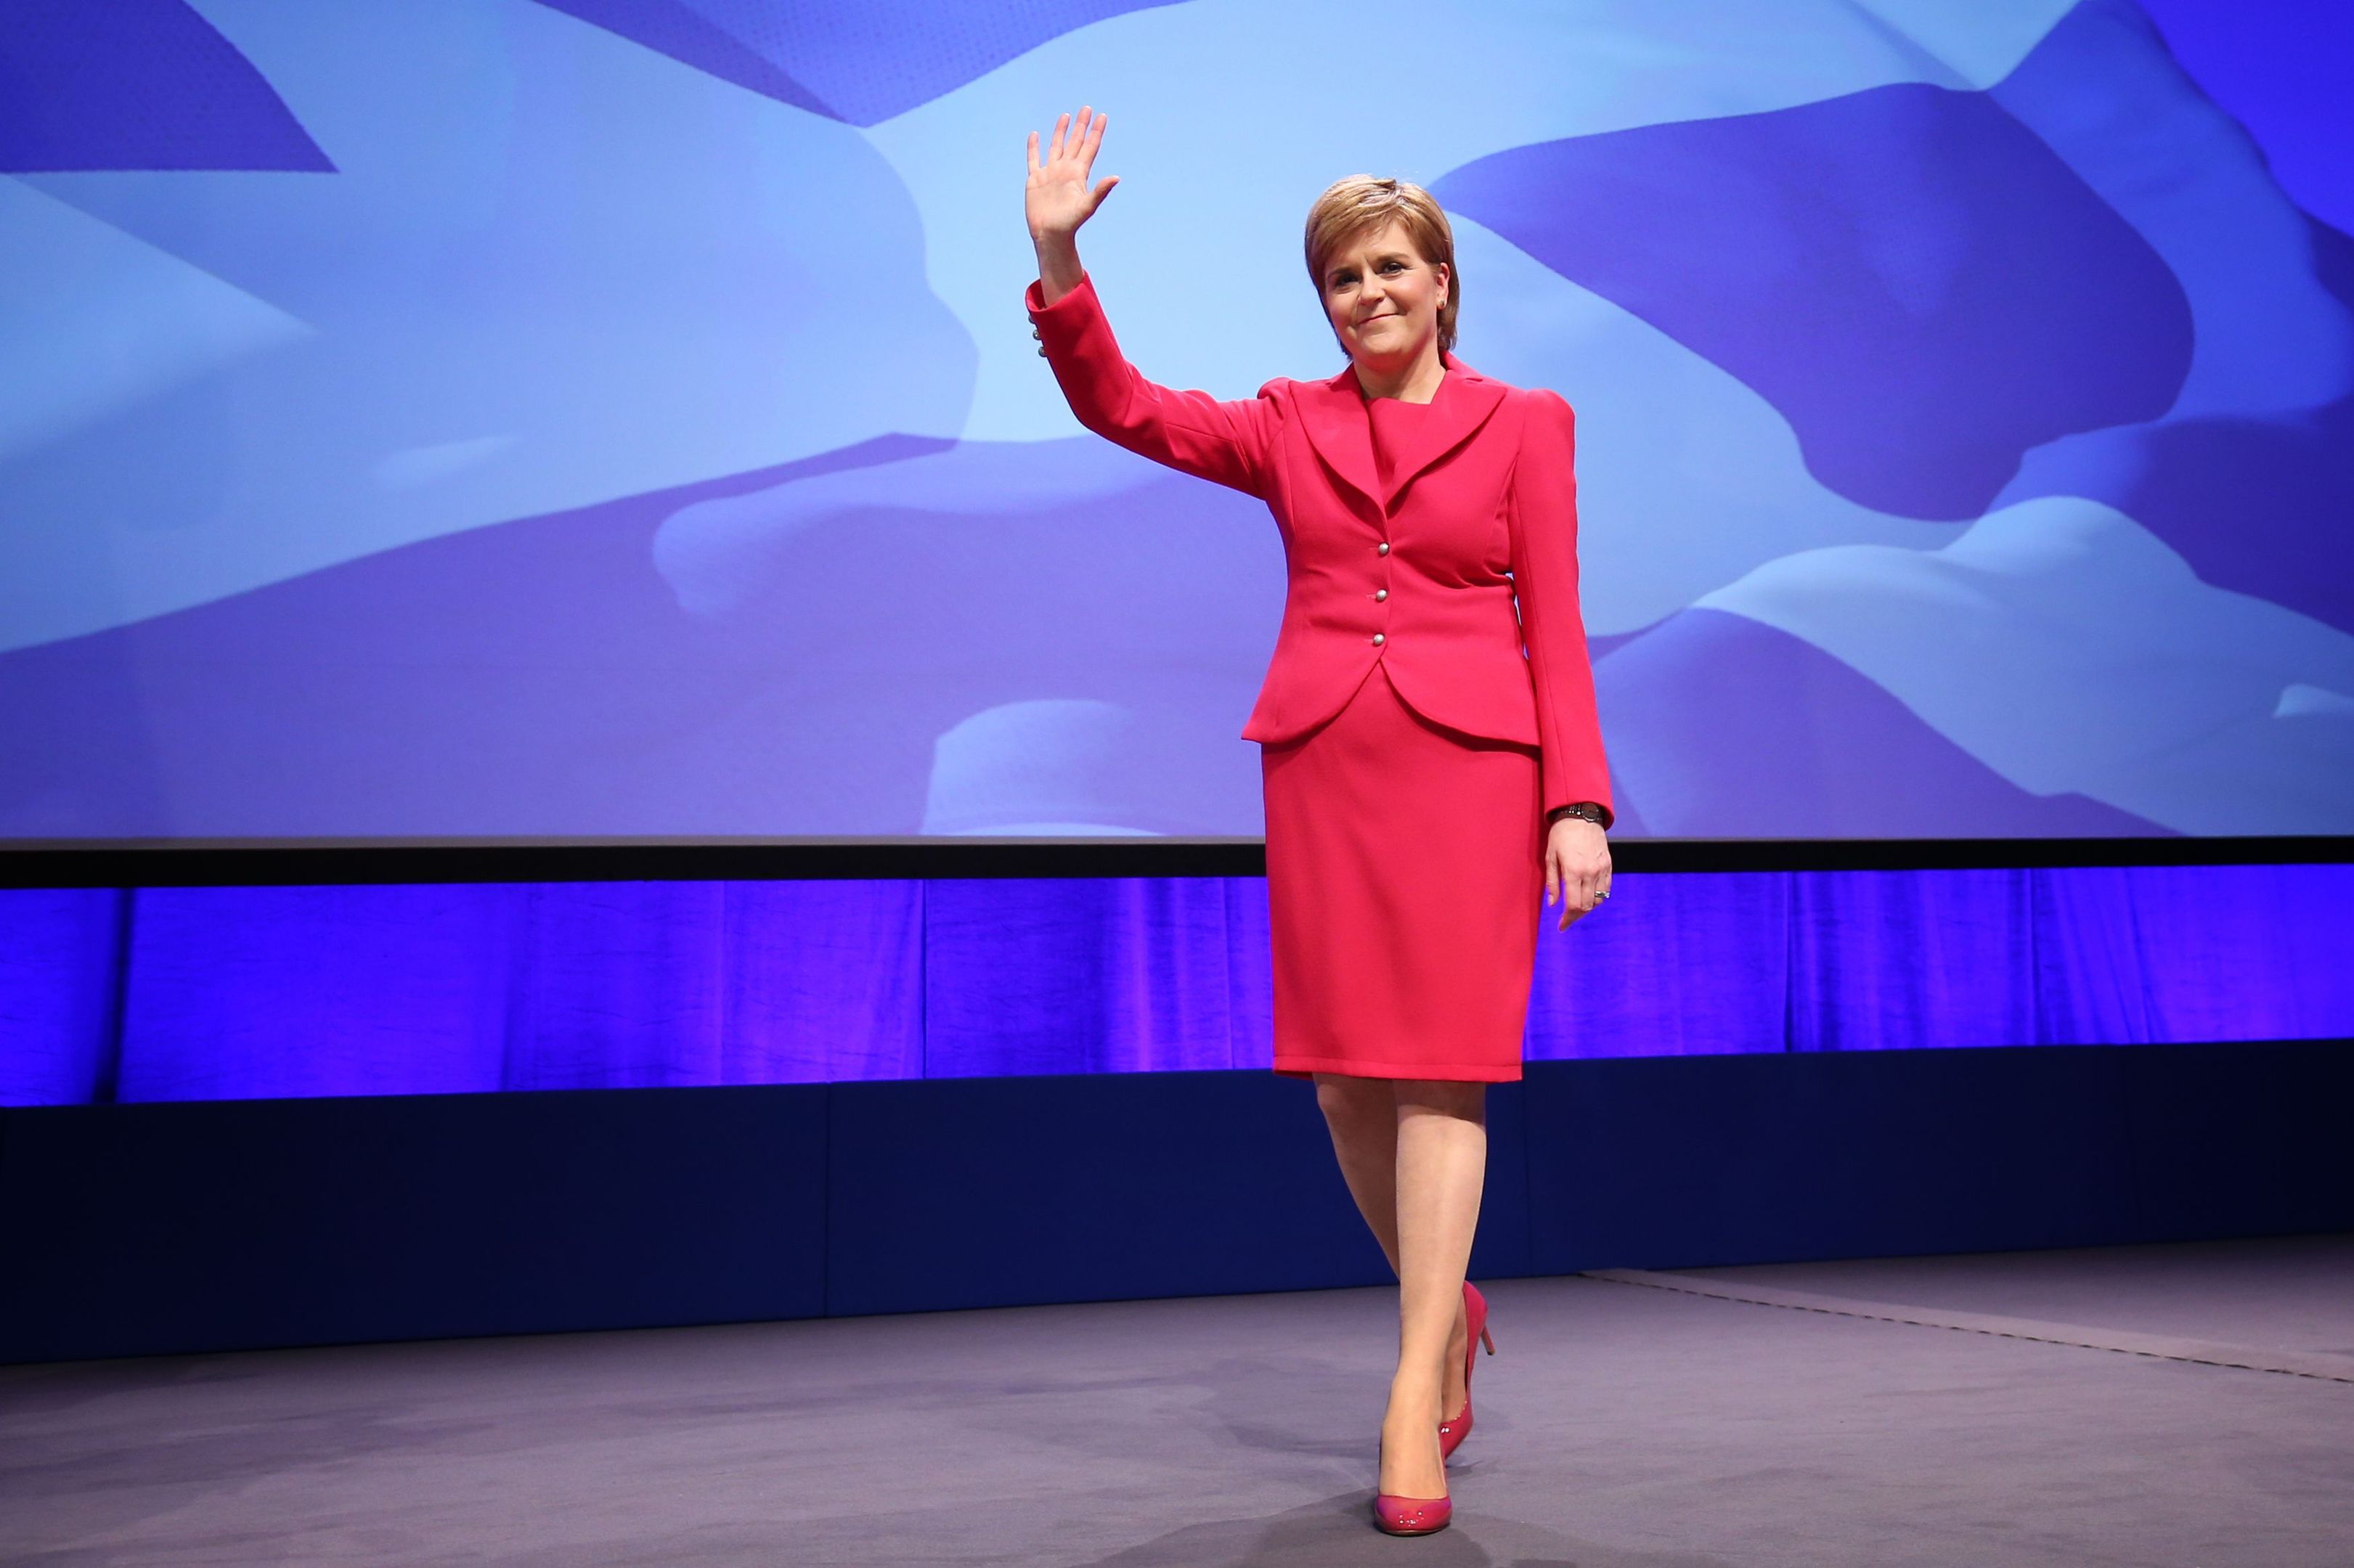 Nicola Sturgeon after giving her address at the SNP conference in Glasgow.